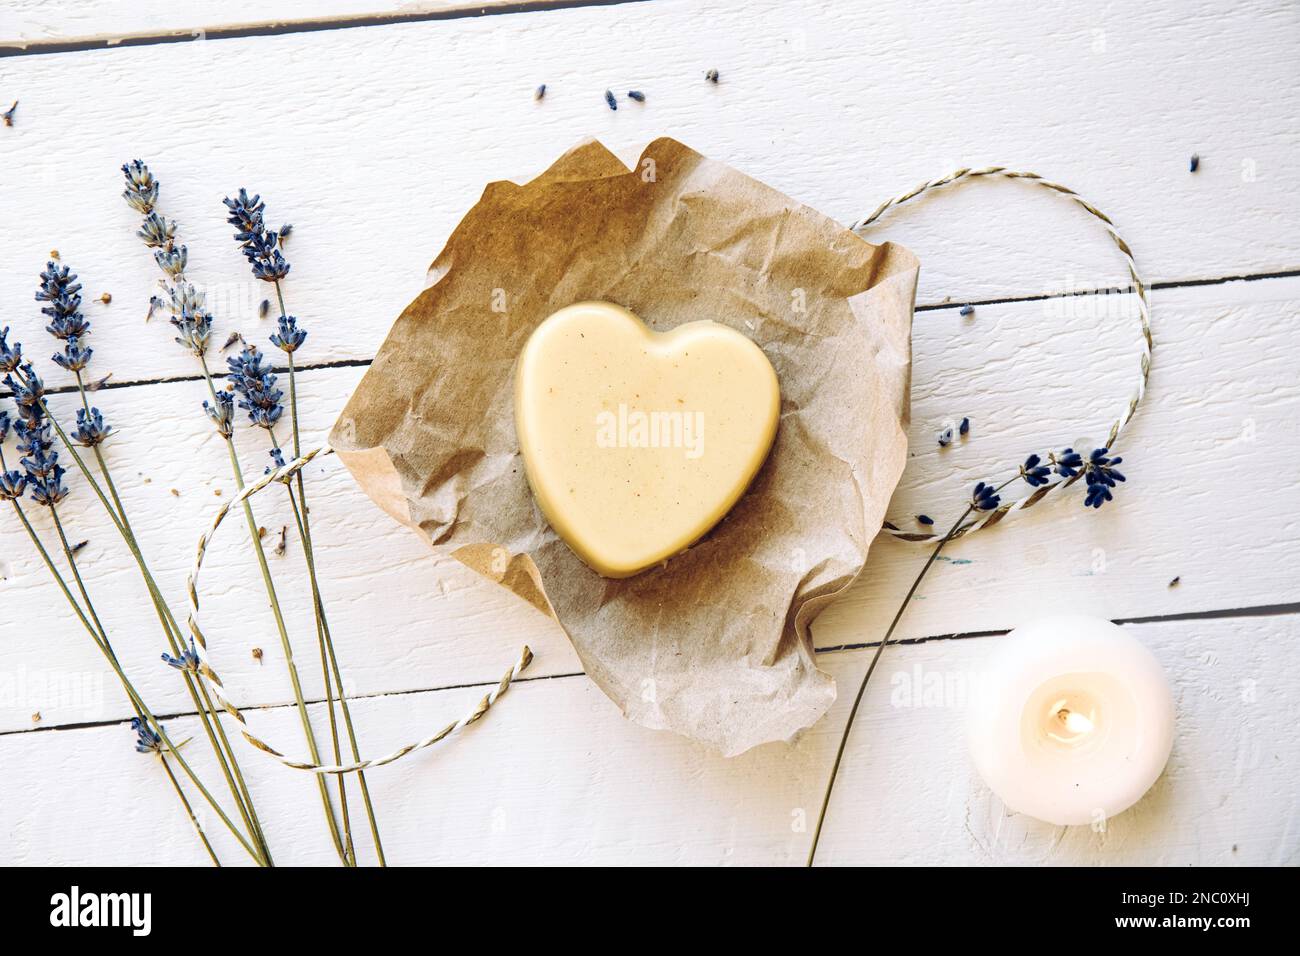 Handmade beeswax and shea butter solid moisturizing hand cream. Heart shape cream bar made of all natural ingredients. White wood board background. Stock Photo